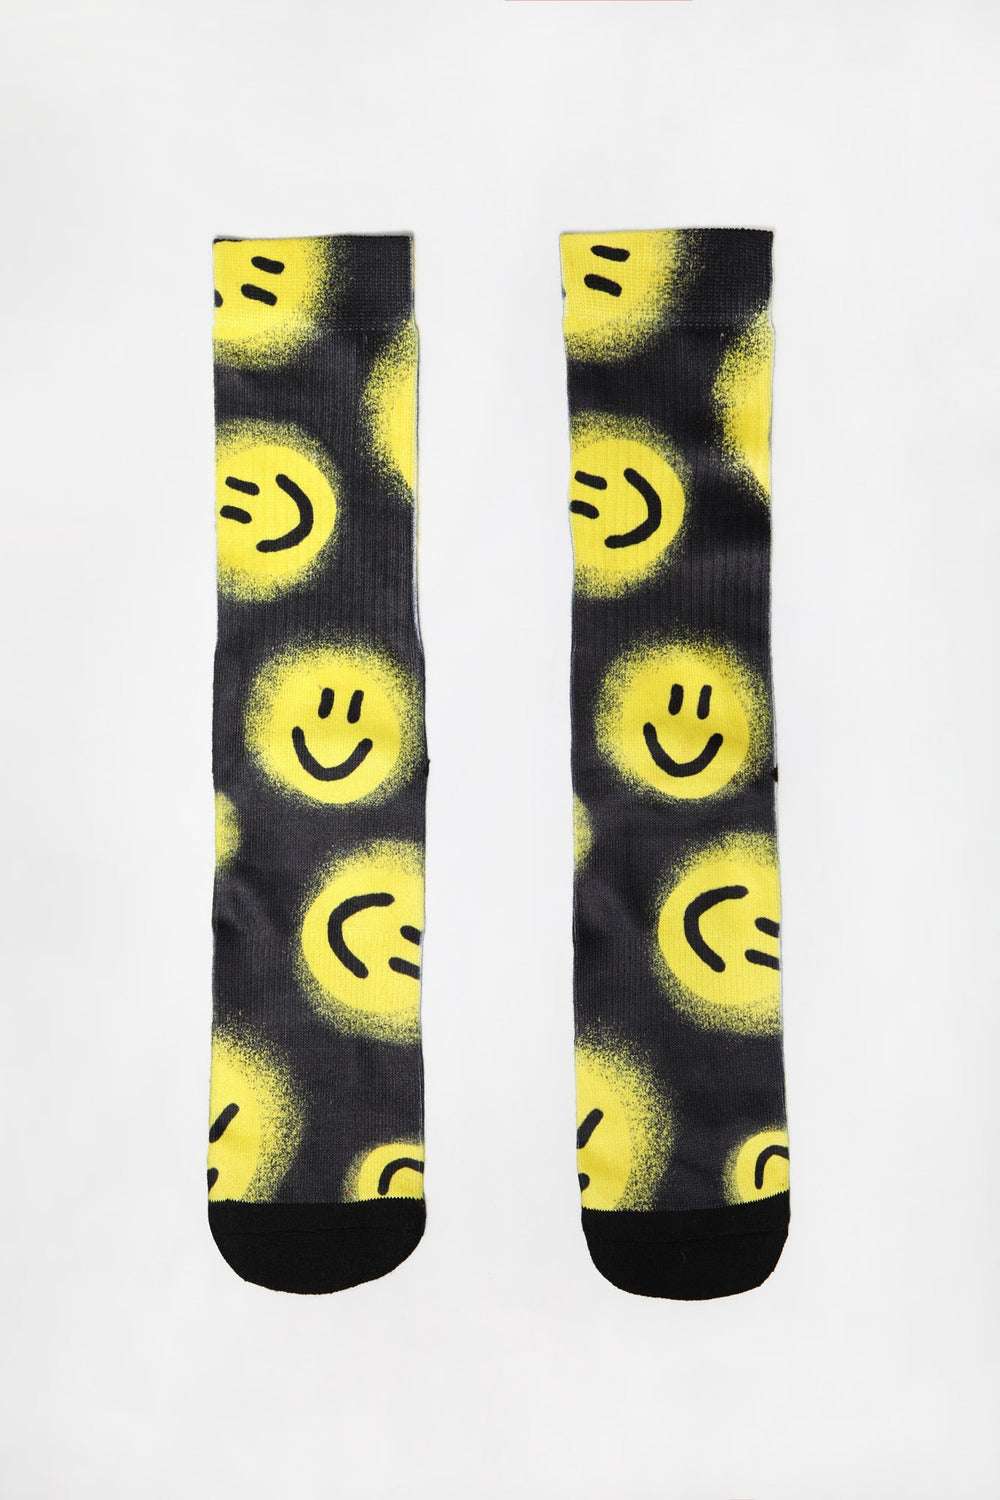 Chaussettes Smiley Zoo York Homme Chaussettes Smiley Zoo York Homme